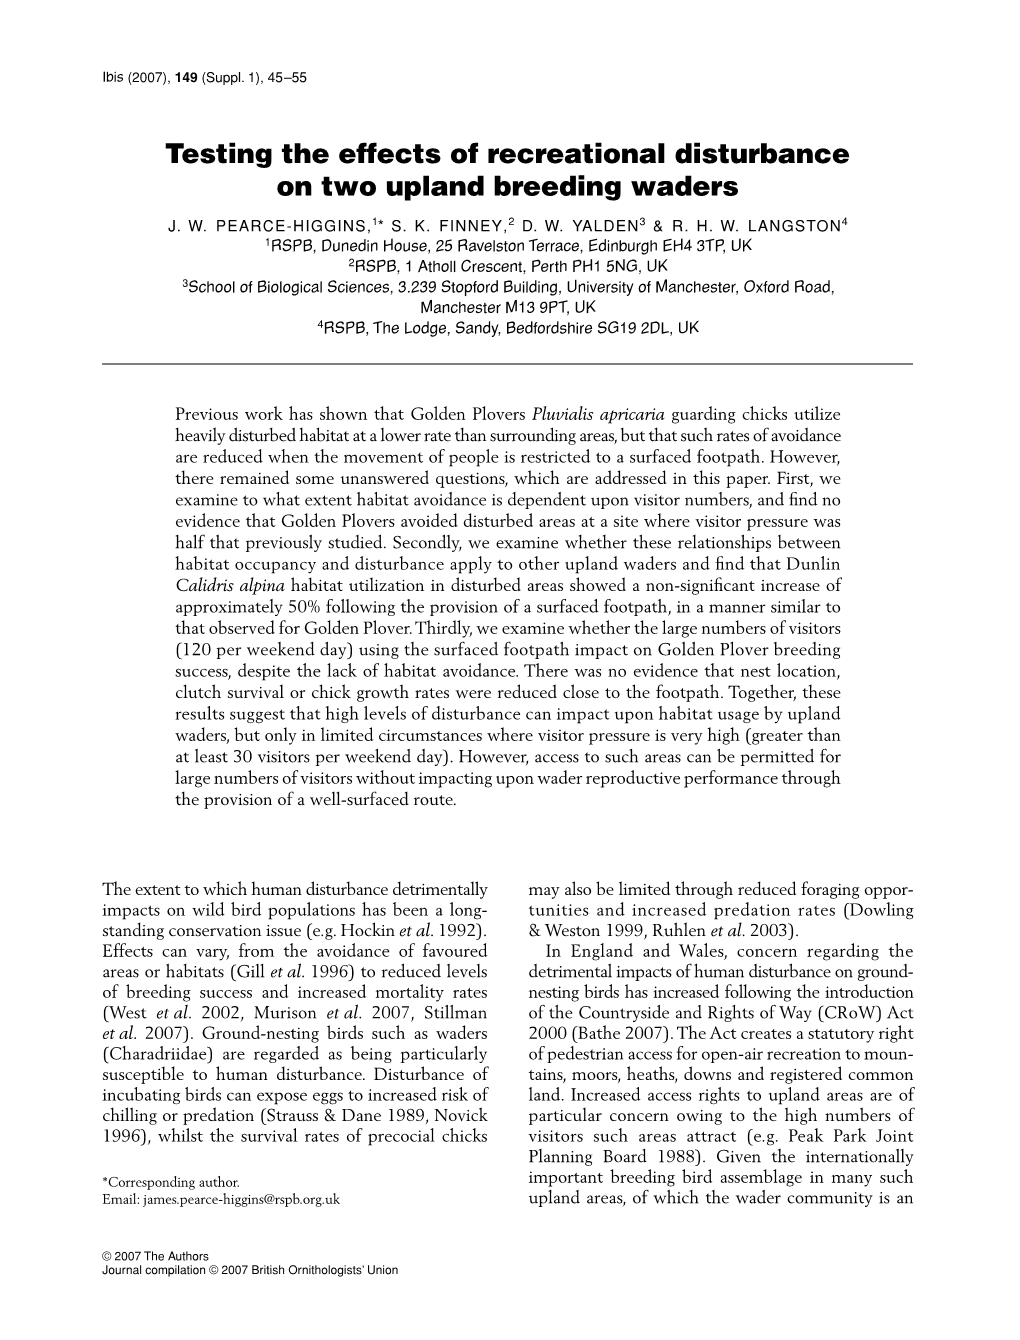 Testing the Effects of Recreational Disturbance on Two Upland Breeding Waders